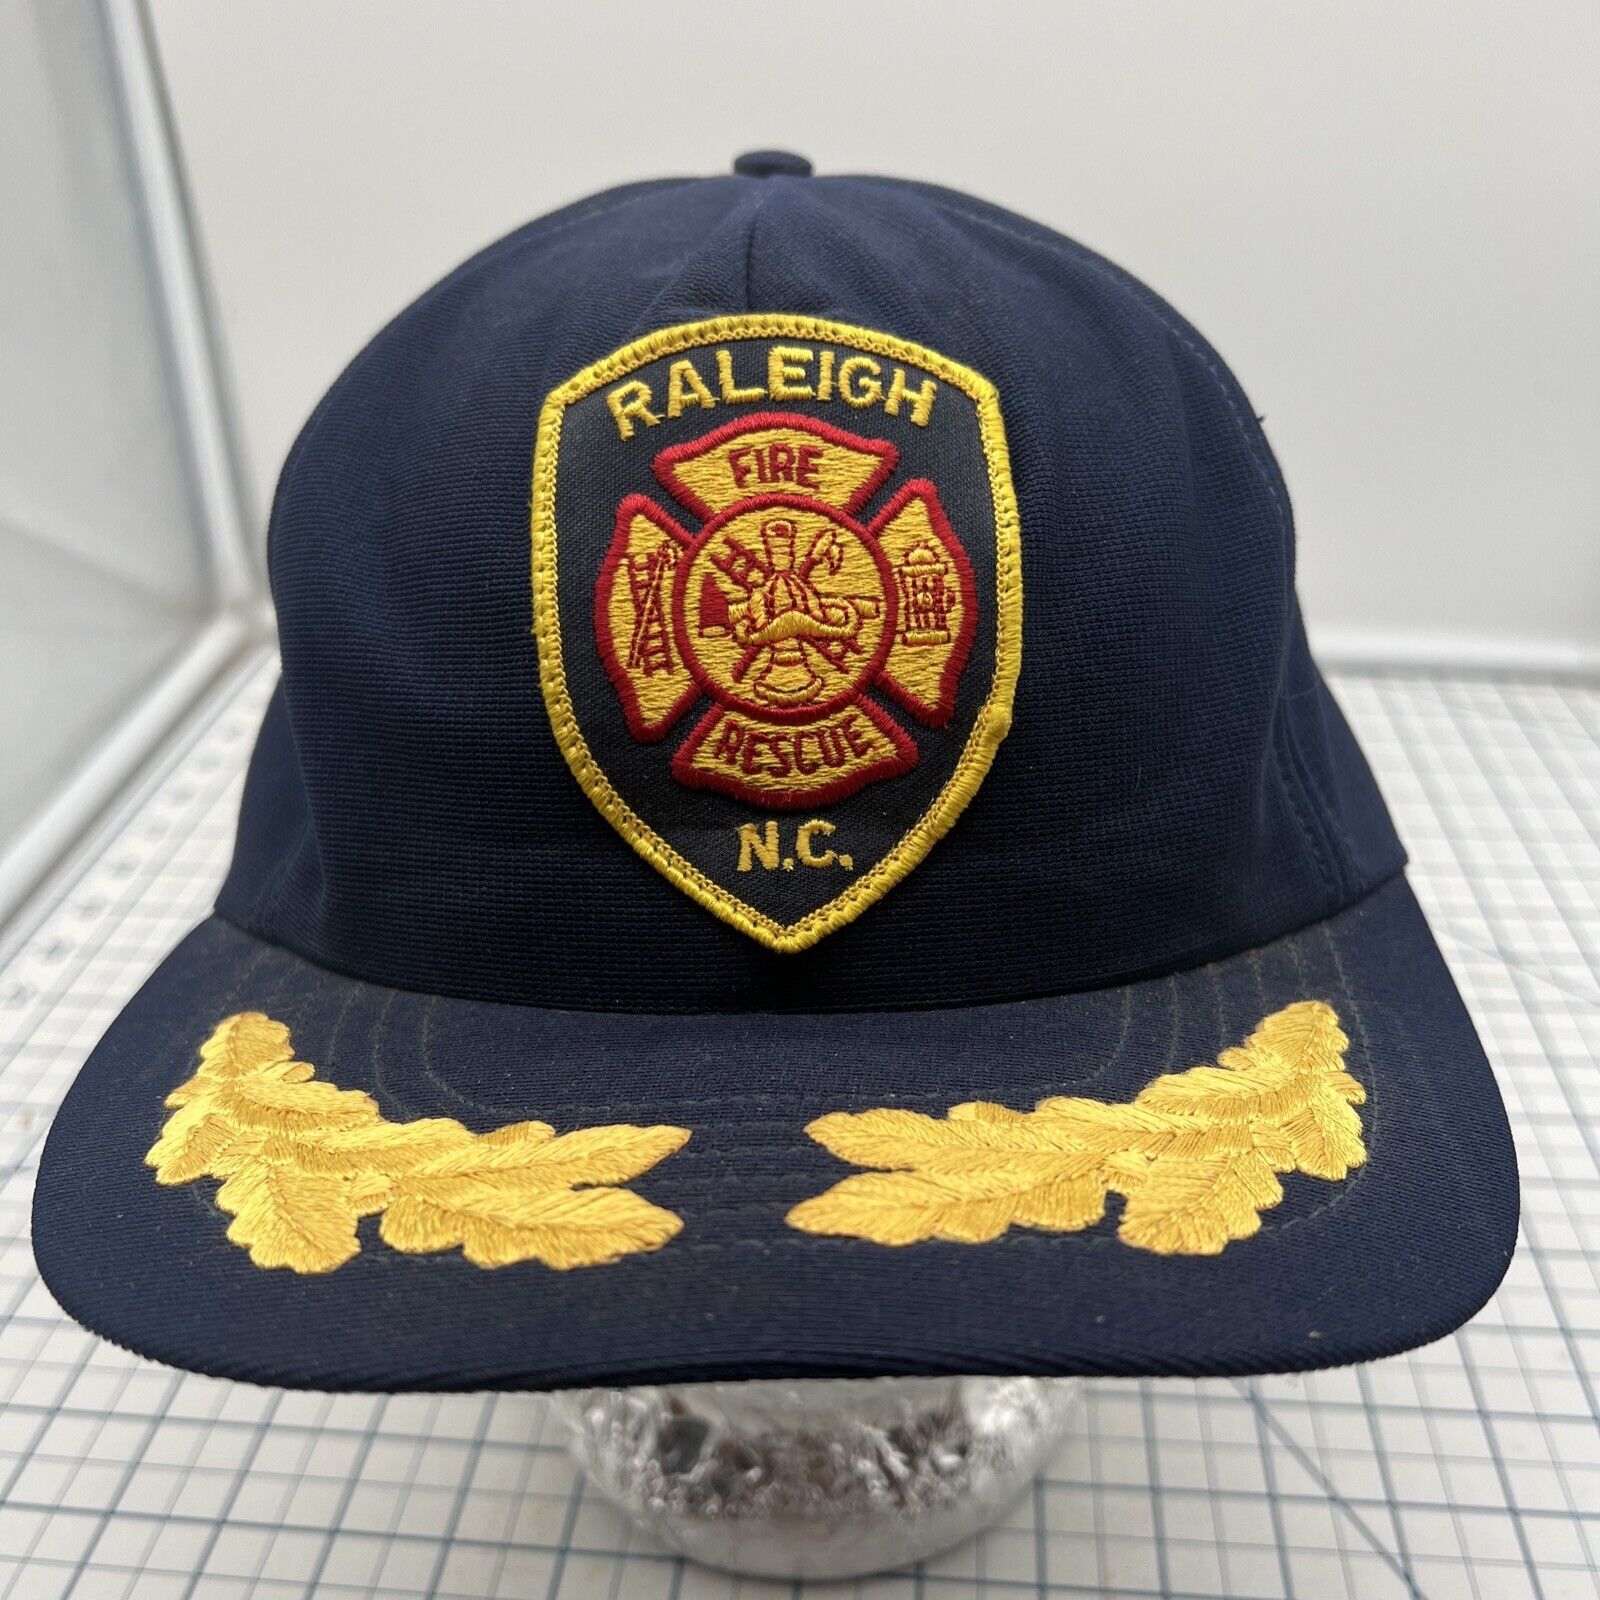 Raleigh NC North Carolina Fire Department Rescue Hat Vintage Snapback *No Foam